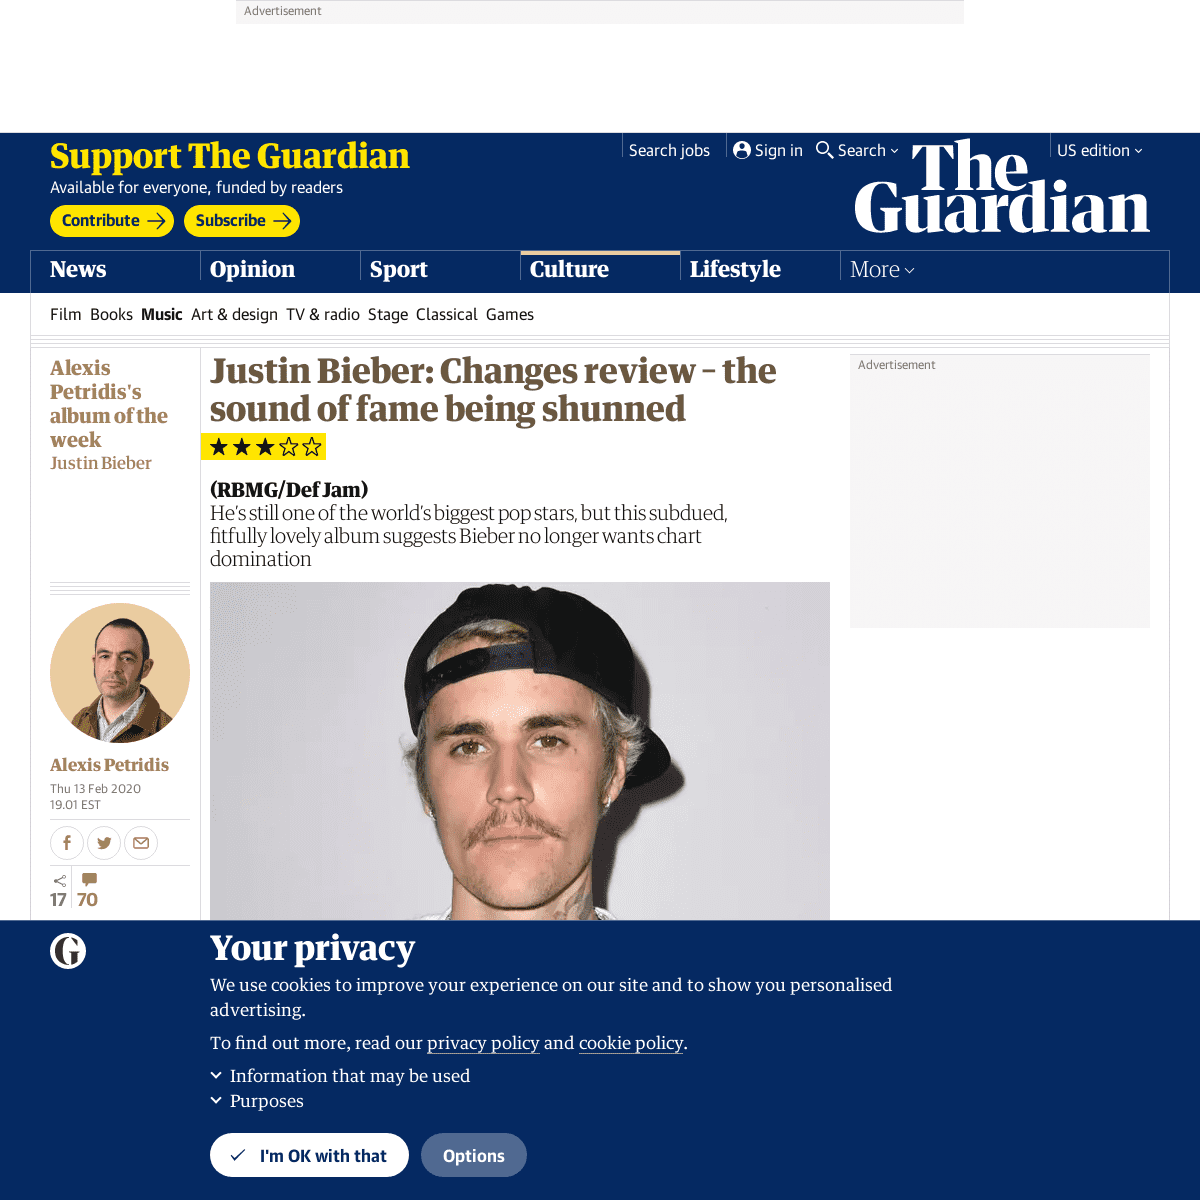 A complete backup of www.theguardian.com/music/2020/feb/14/justin-bieber-changes-review